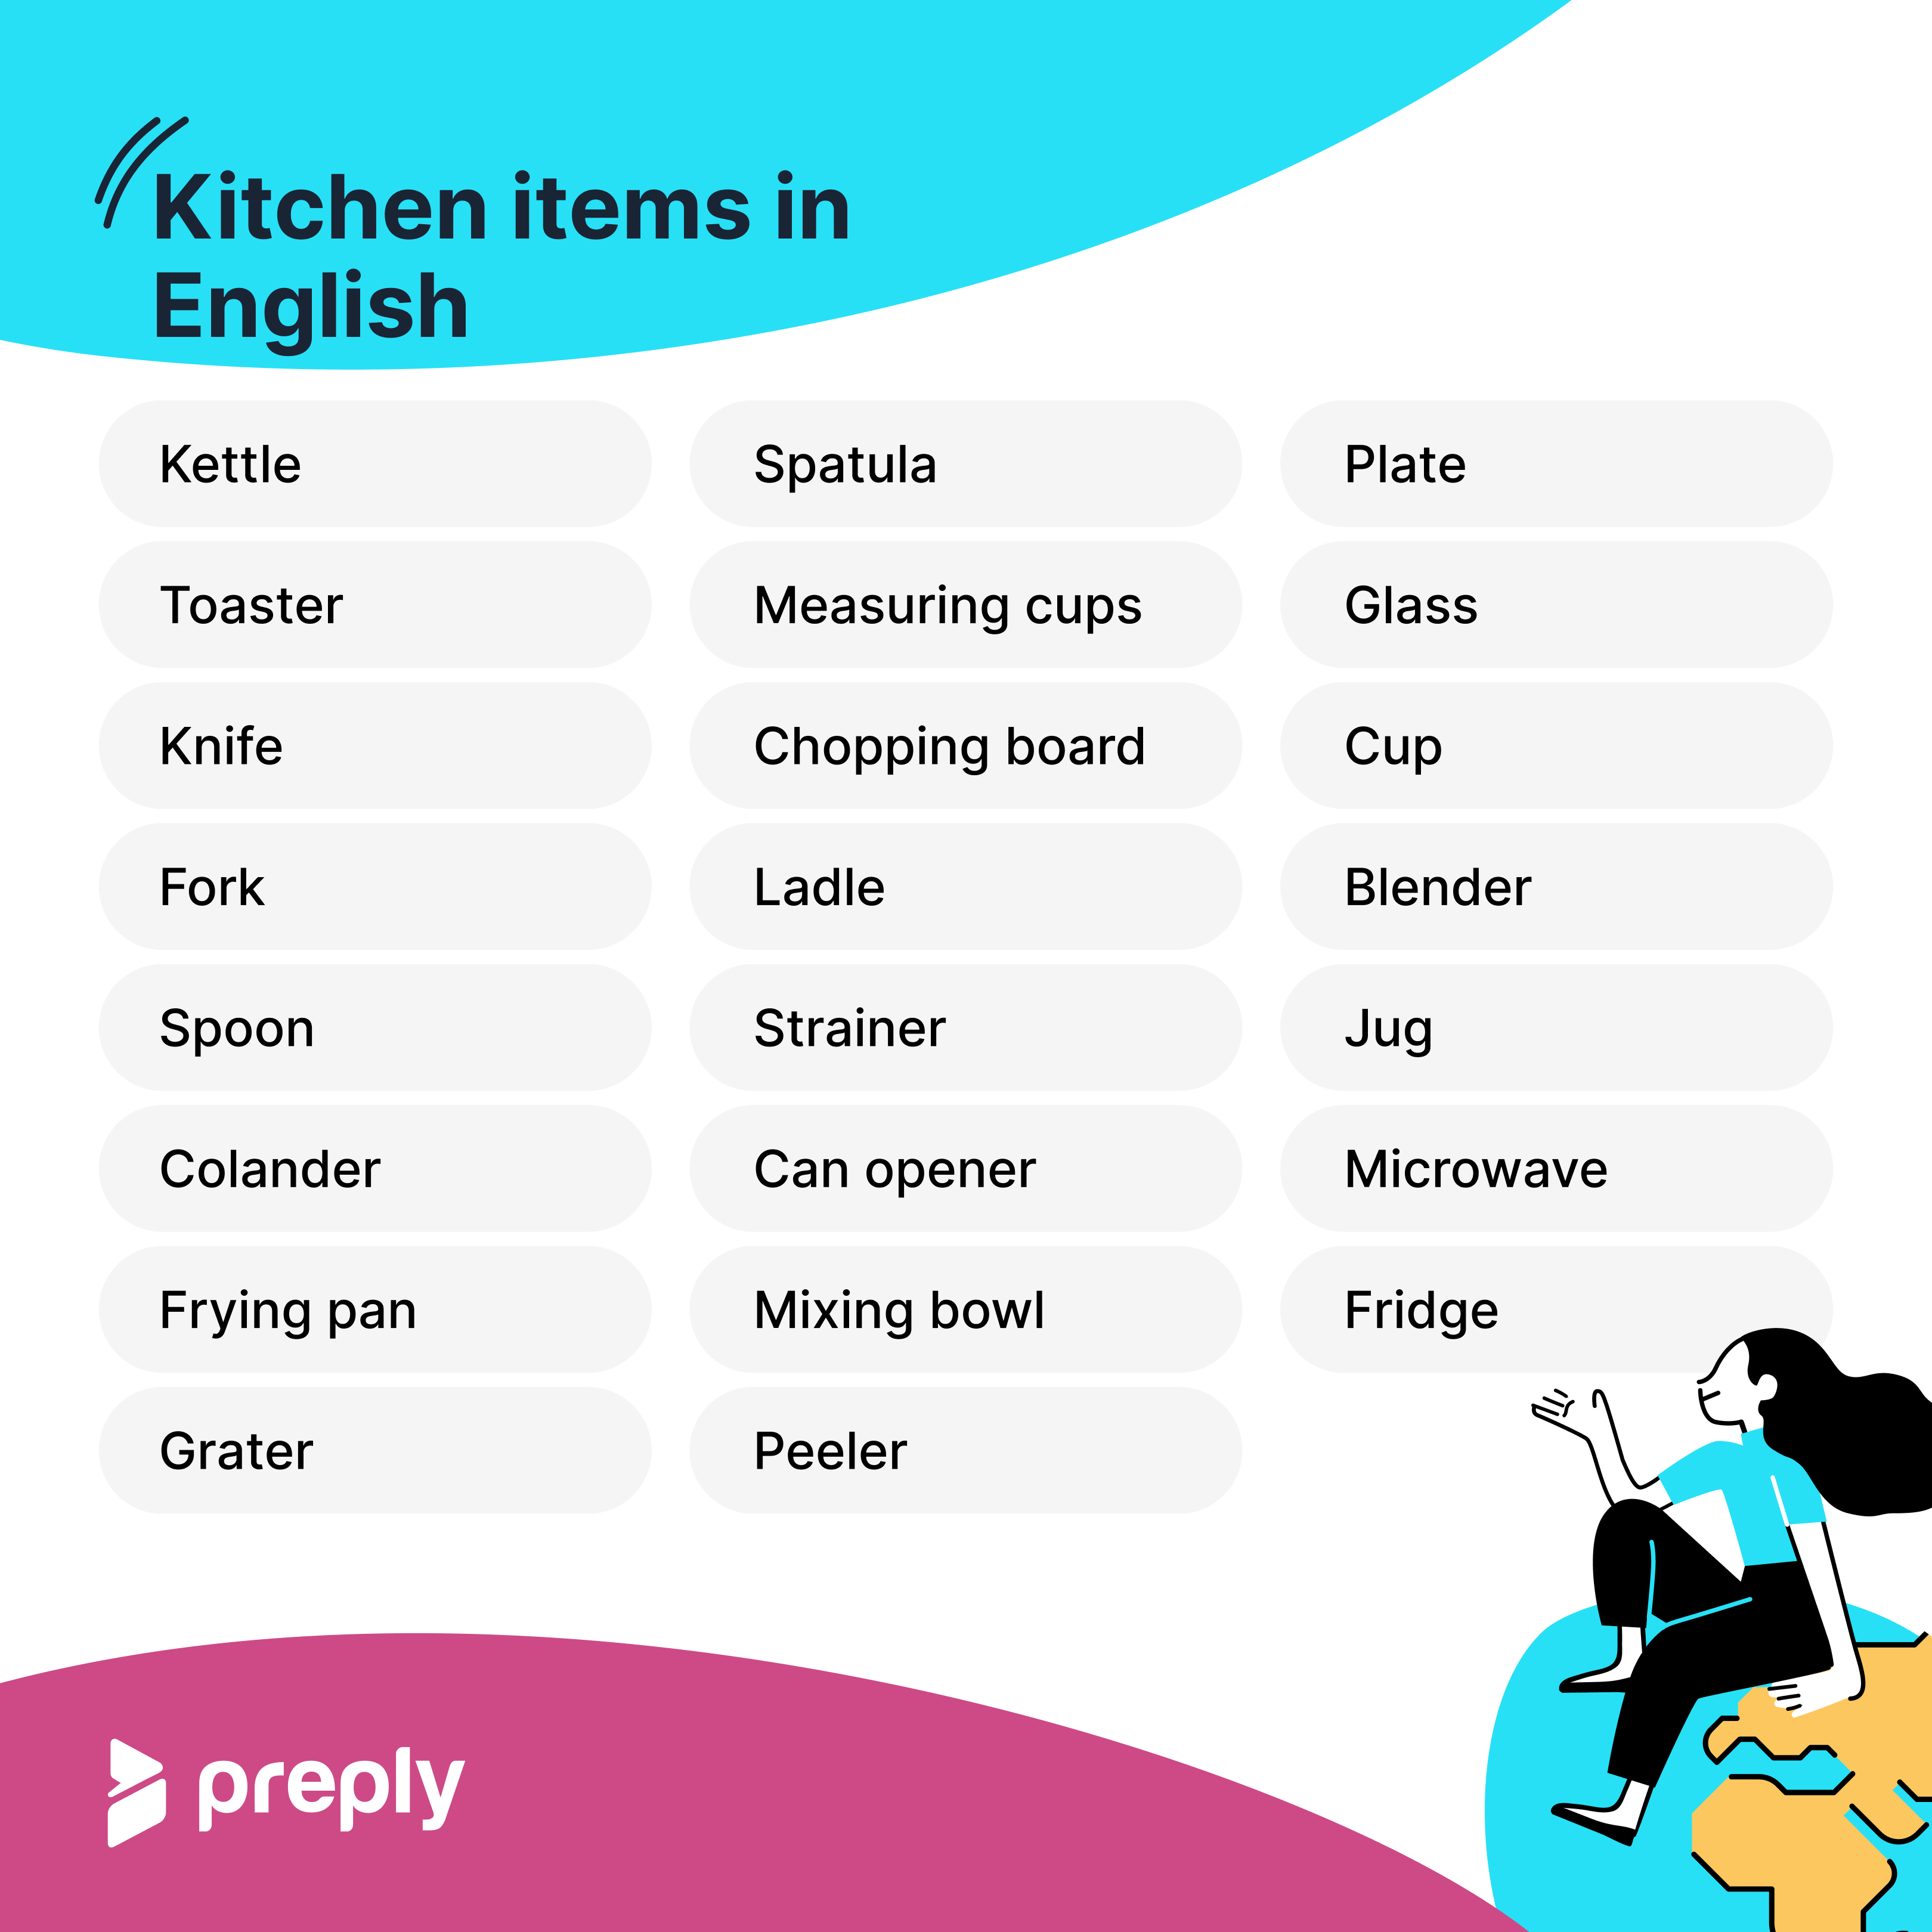 List of 70+ Kitchen Utensils Names with Pictures  Kitchen utensils list,  English learning books, Kitchen tools and their uses